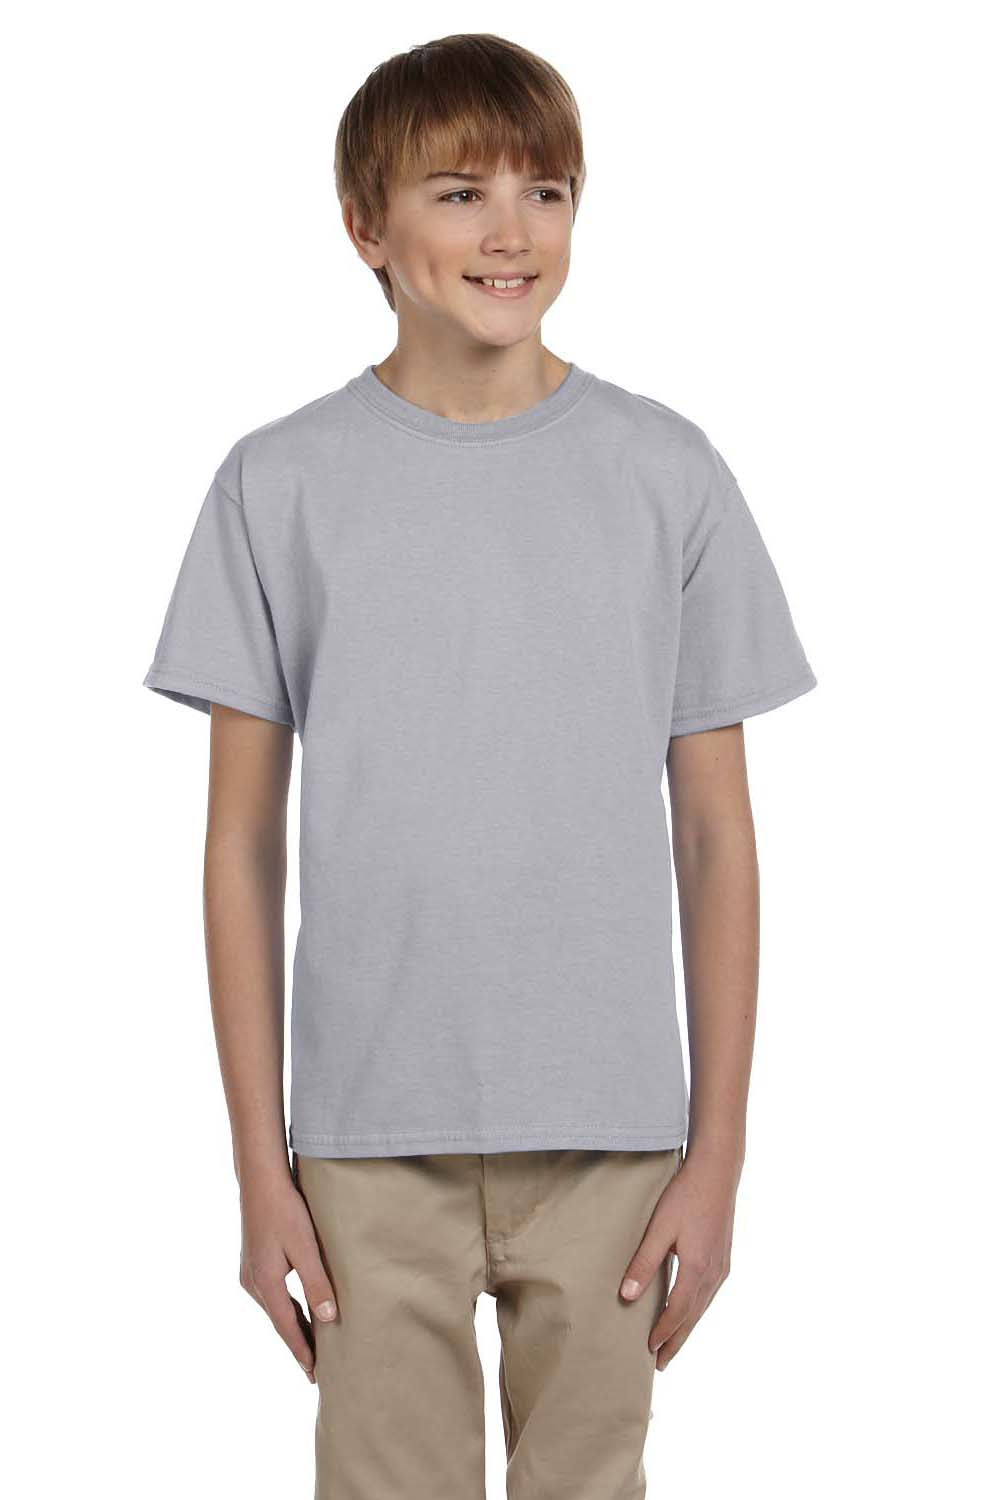 Fruit Of The Loom 3931B Youth HD Jersey Short Sleeve Crewneck T-Shirt Heather Grey Front